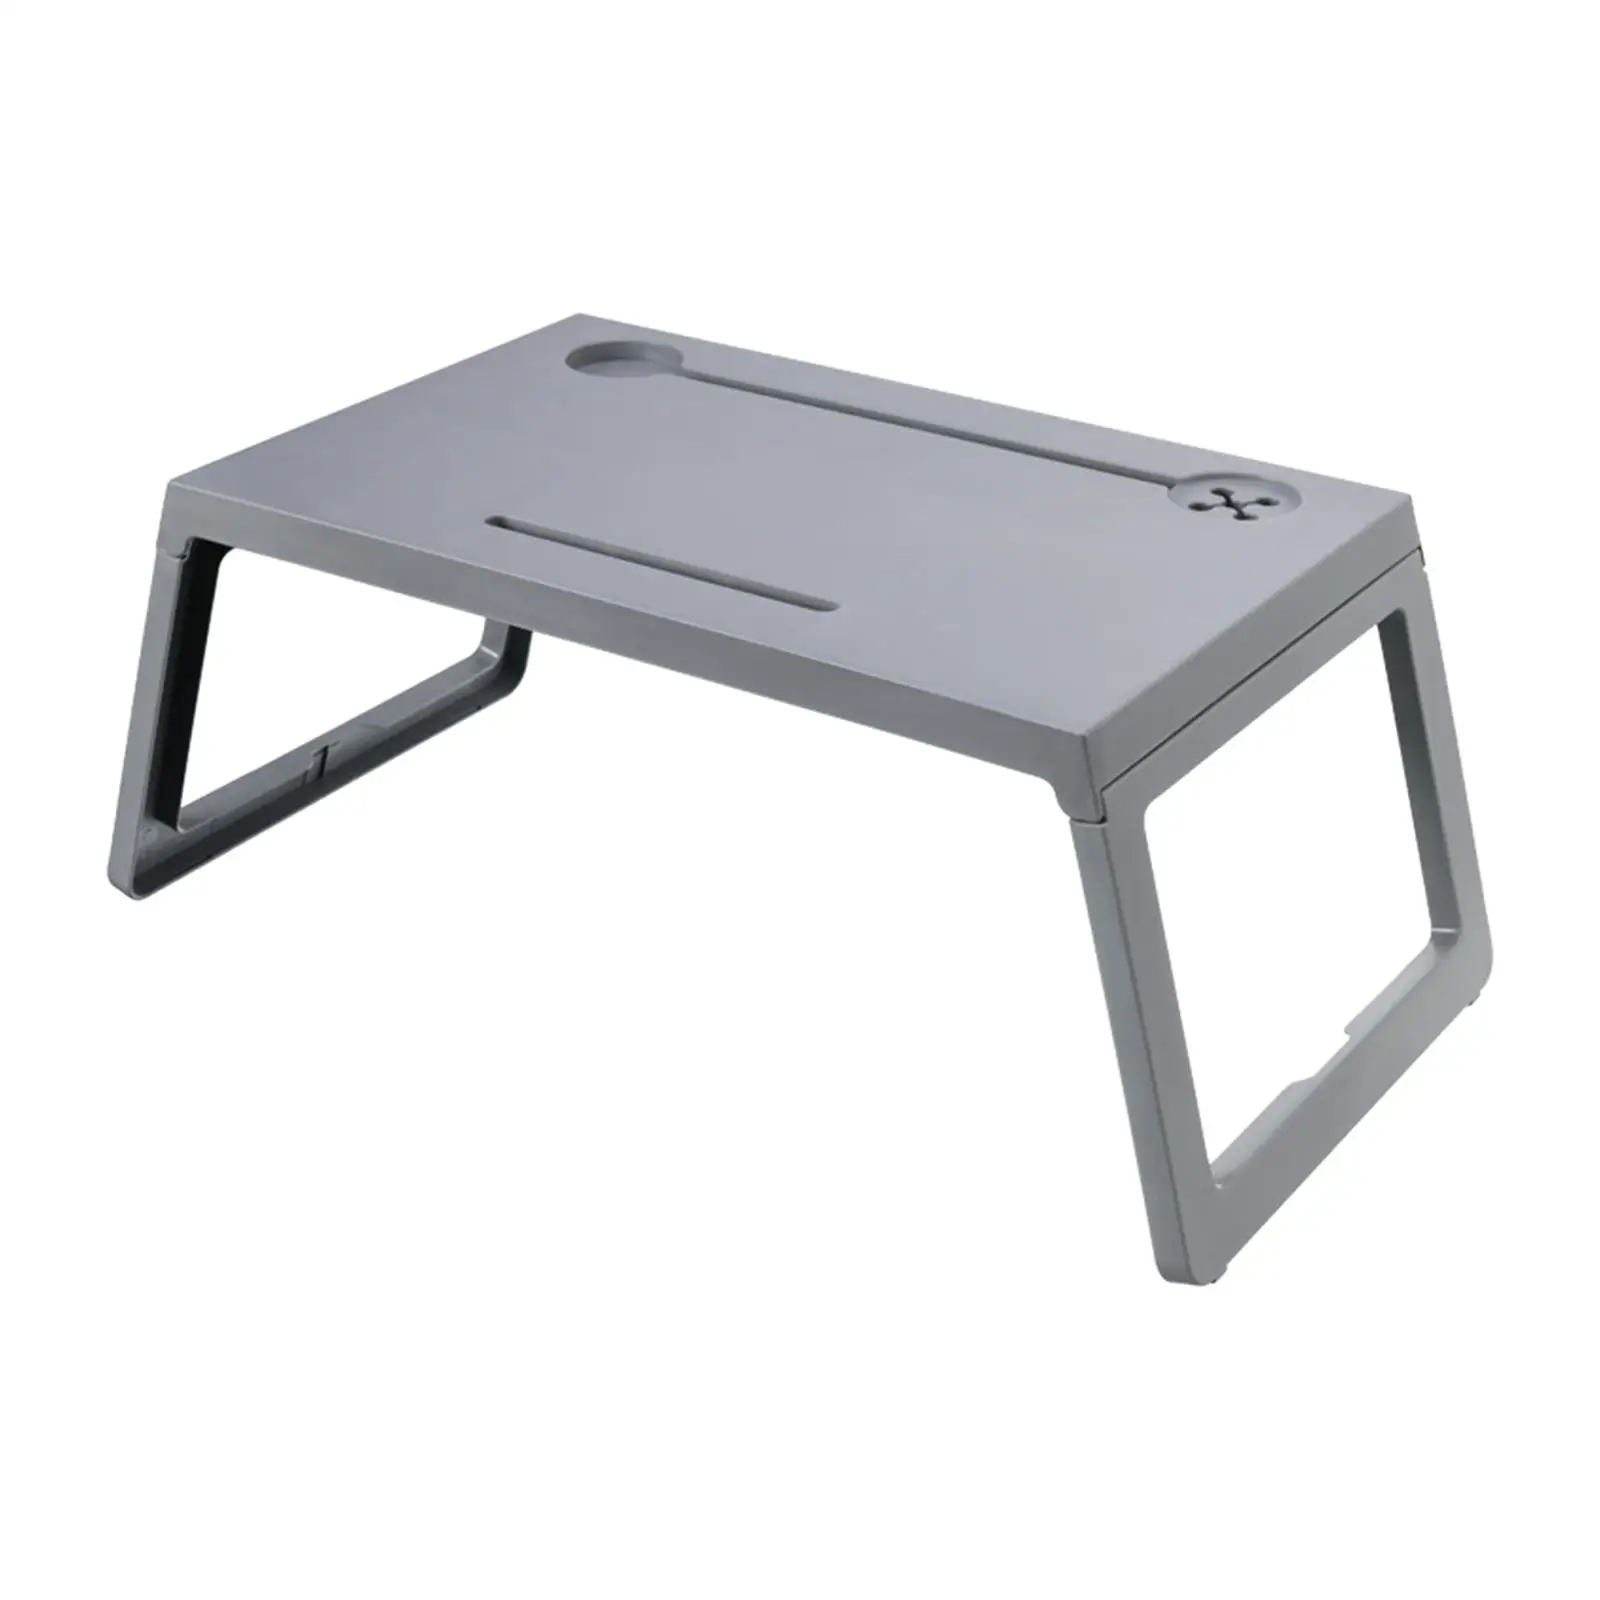 Adjustable Laptop Desk with cups Holder Drawer Breakfast Tray Portable Laptop Table for Reading Floor Table Watching Sofa Bed